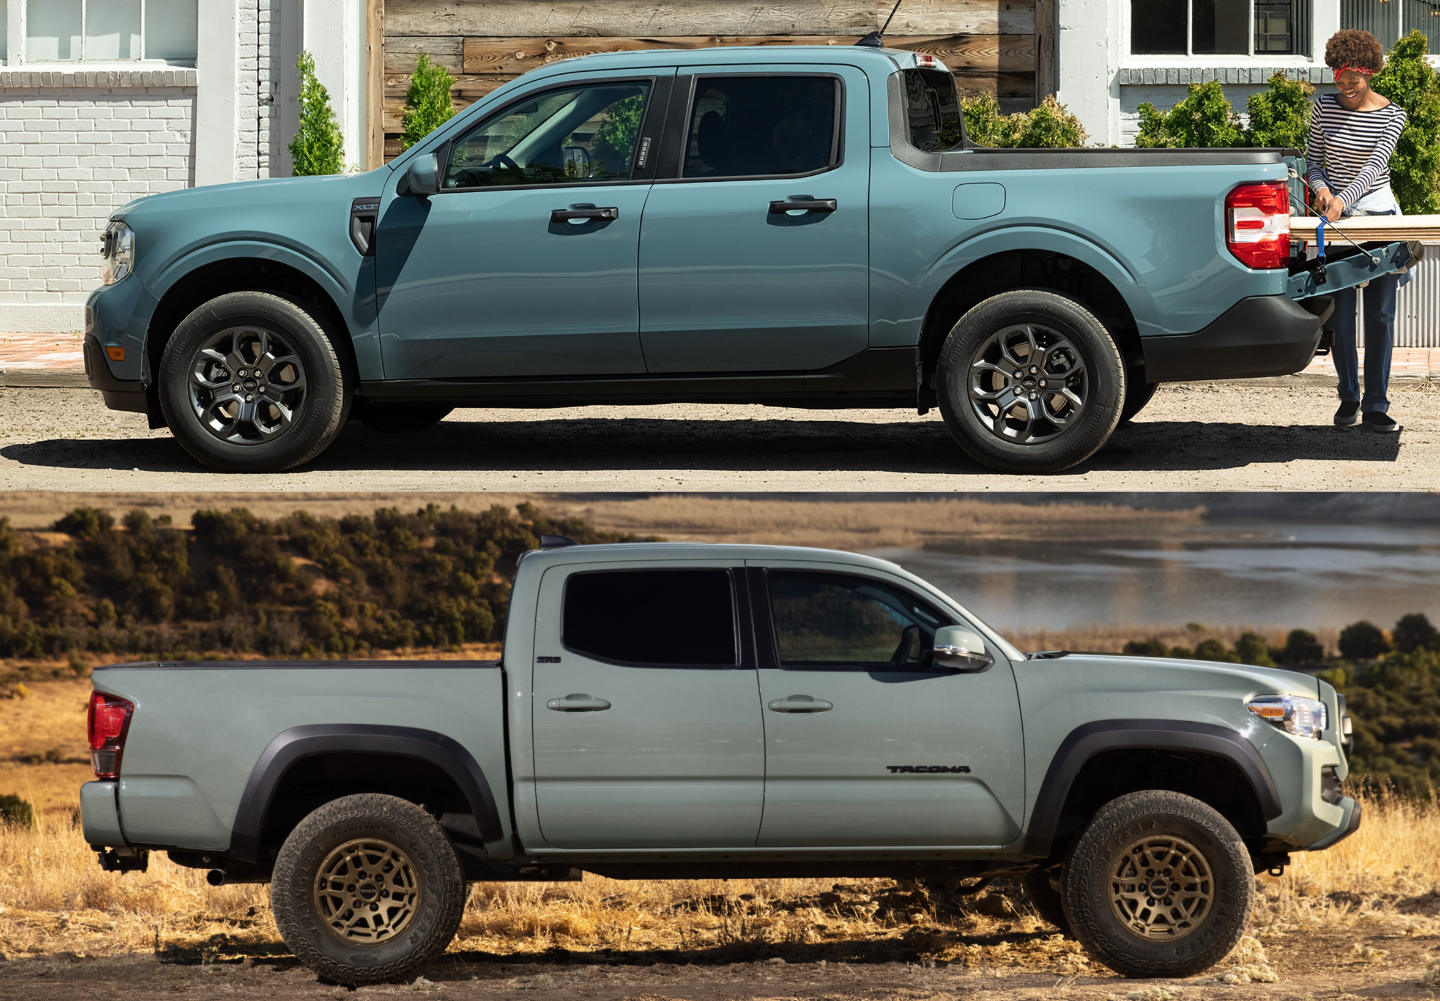 The best small pickup truck of 2022 could be the Ford Maverick or the Toyota Tacoma